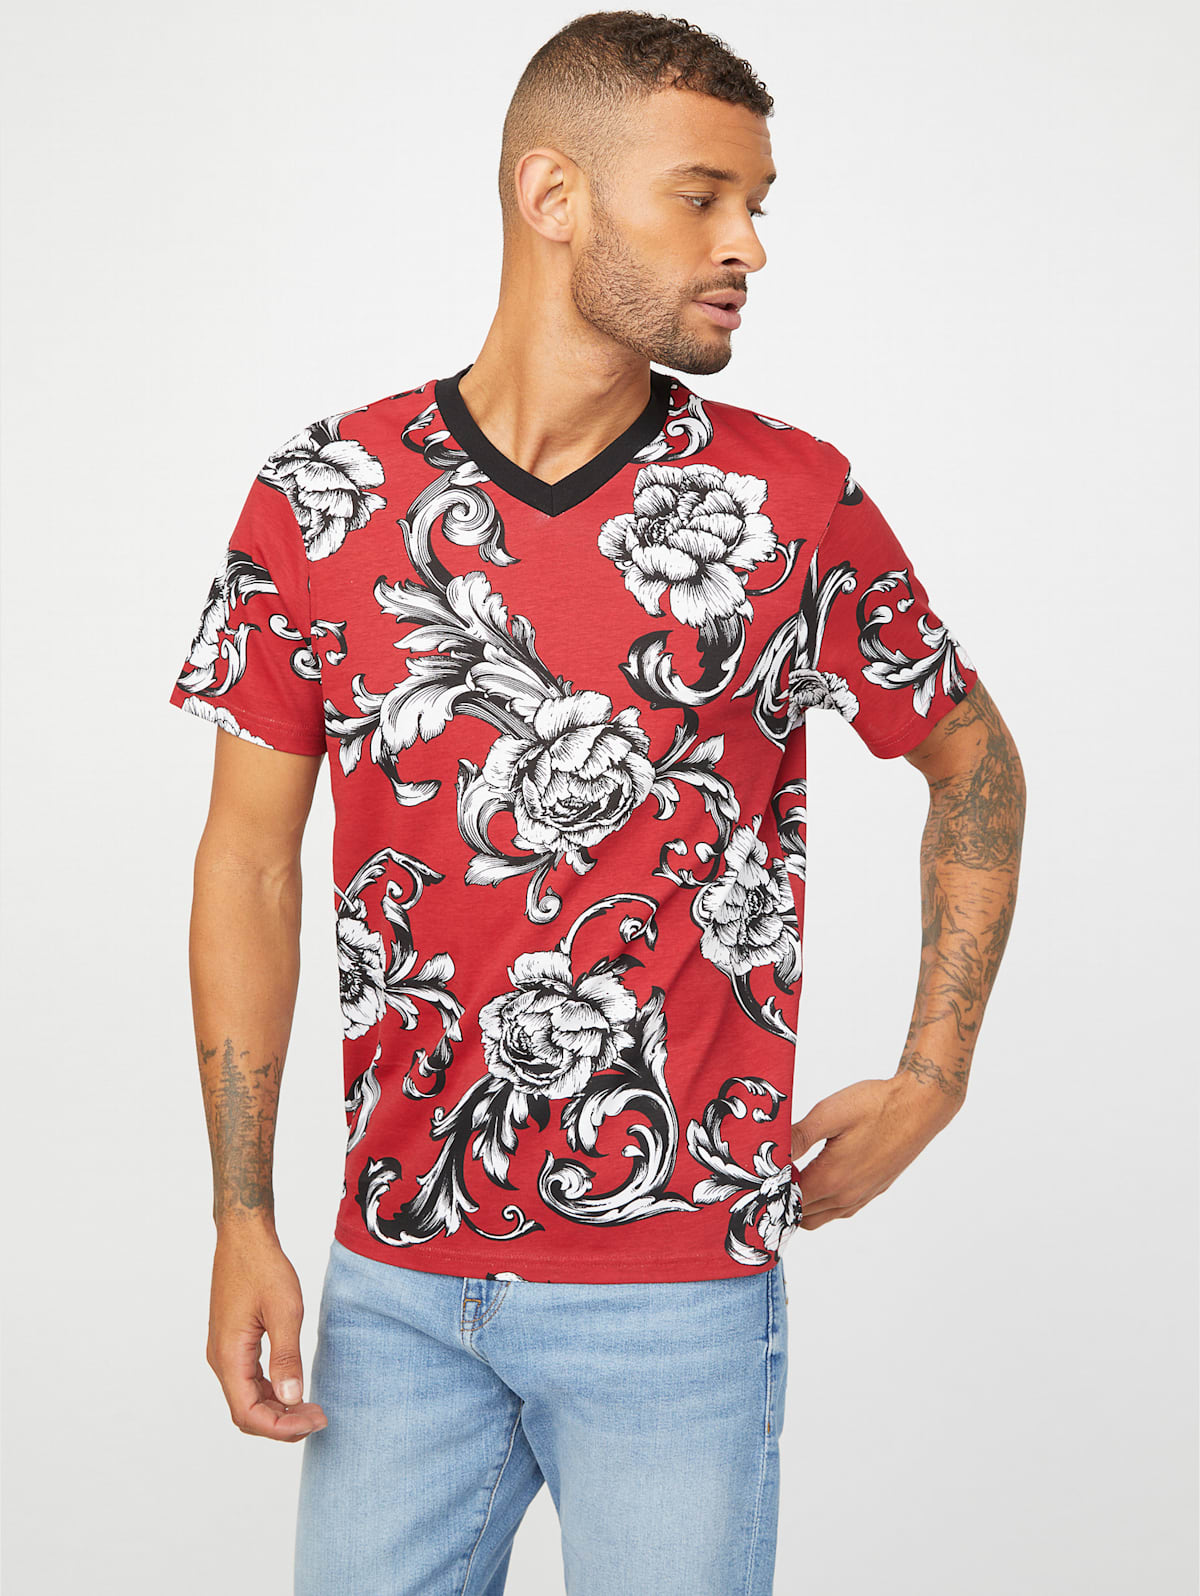 Yachak Floral V-Neck Tee | GUESS Factory